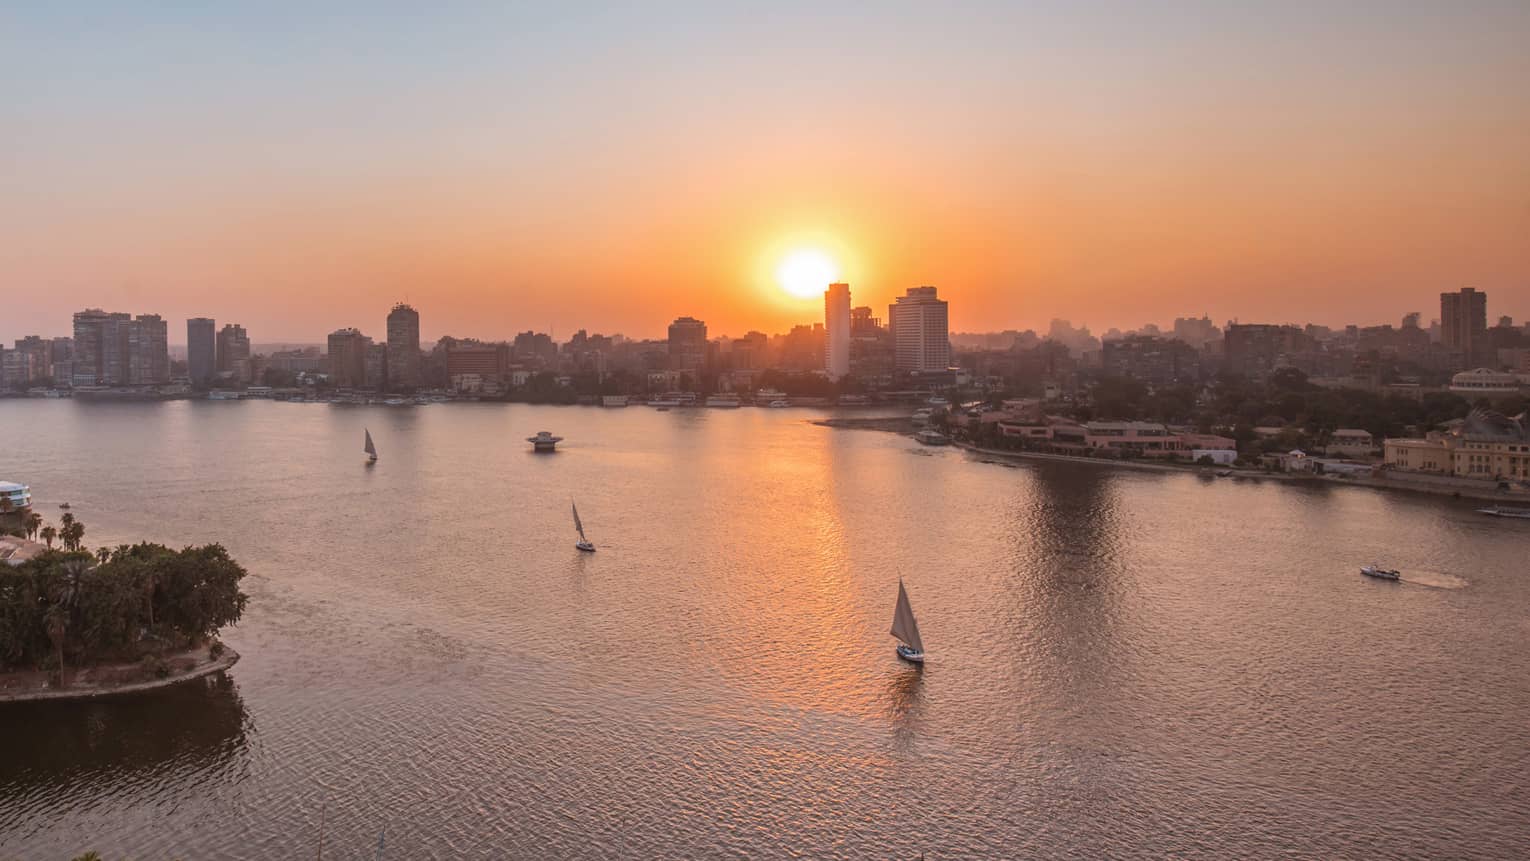 Sunset over Nile River with sailboats in Cairo, Egypt